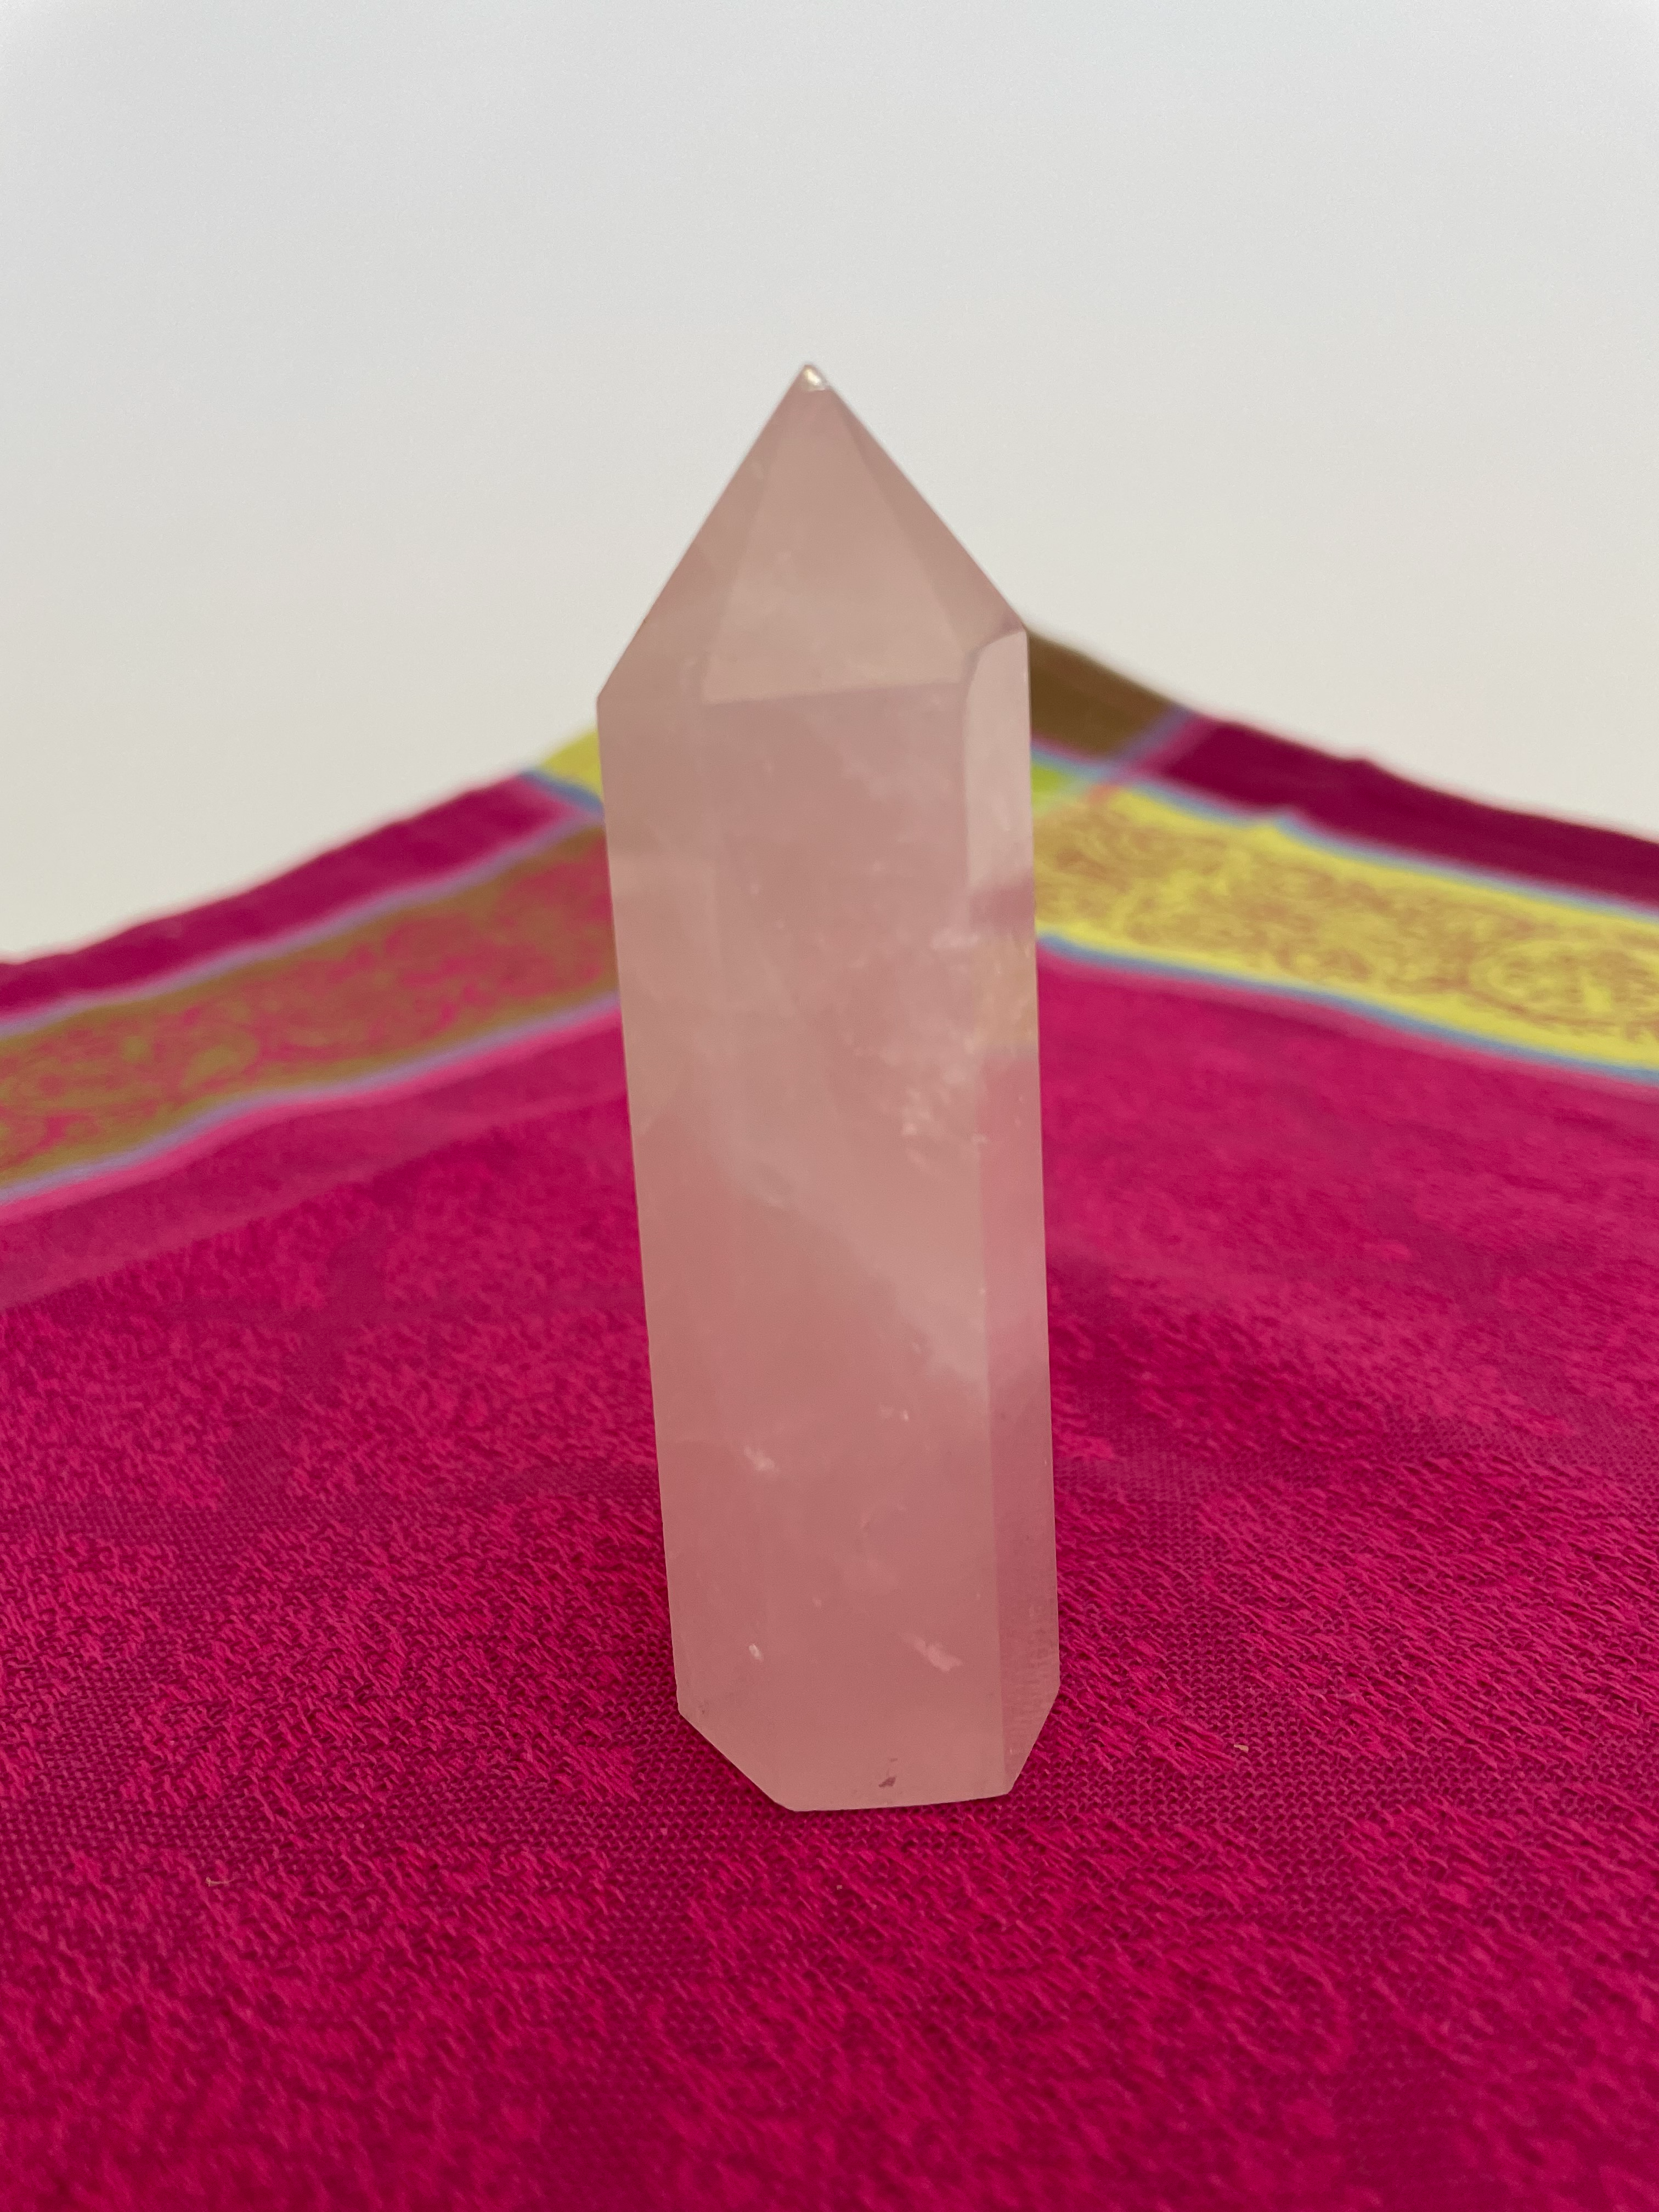 Alternate view. Rose Quartz tower of love 💗. Beautiful rose quartz tower for your altar, for healing or as décor for any room in your home or office. Rose quartz is the ultimate love stone, for love of all types - to attract love and for self-love. It is soothing, enhances compassion, is the best emotional healer, dispels negative energy, opens your heart and so much more. Approx. 3¾" long. See photos below for views of all sides. Cost is $18.00.